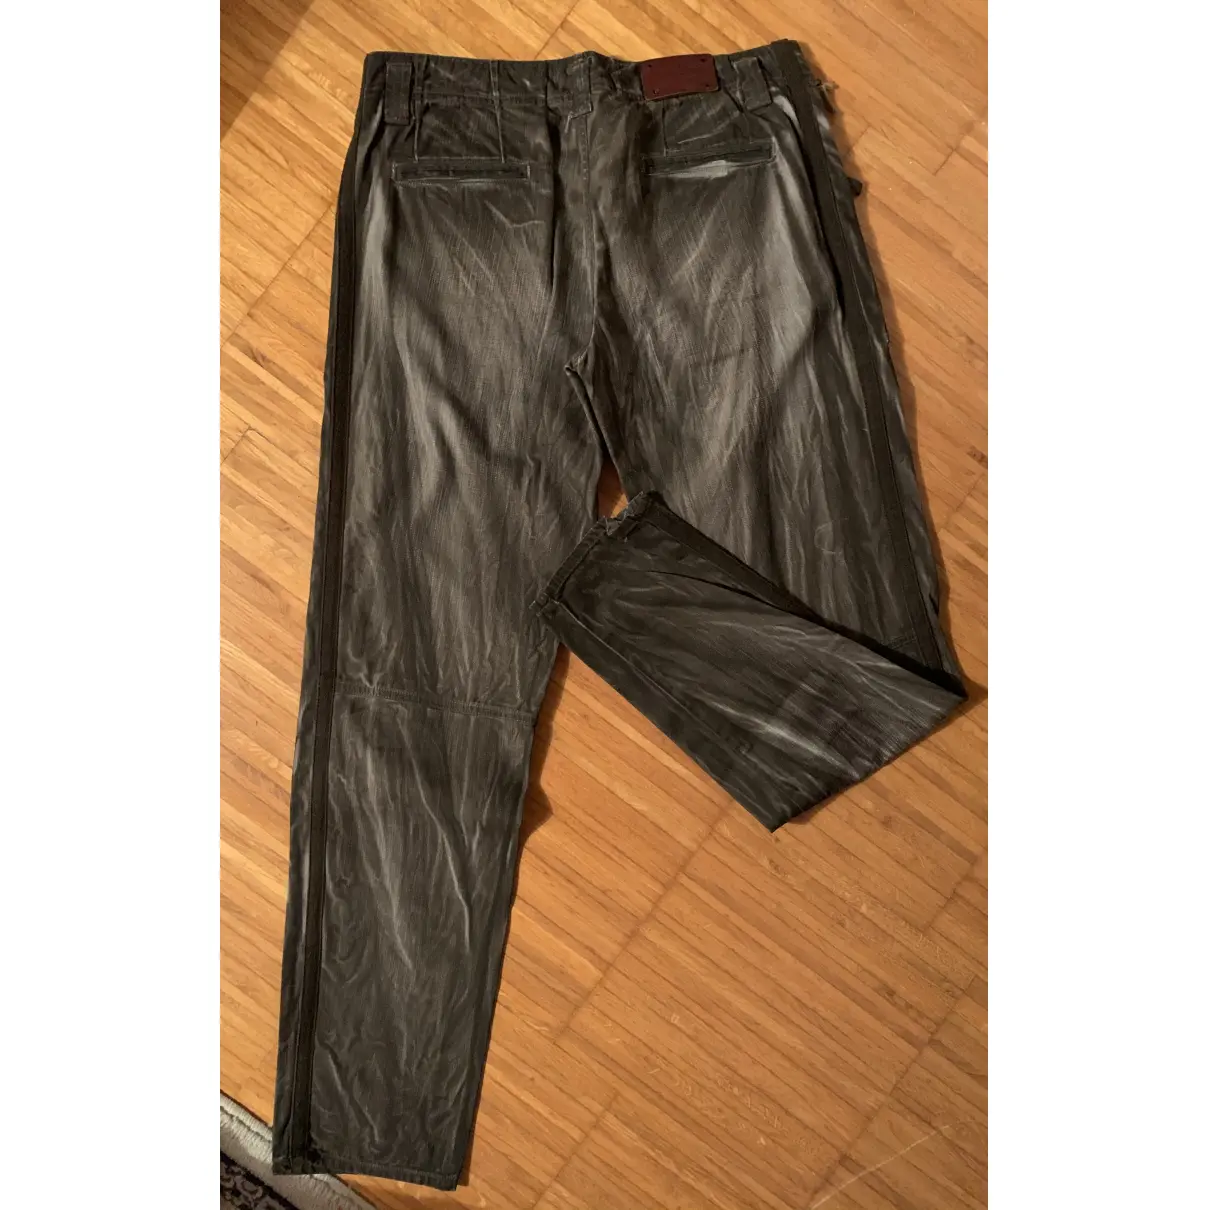 Buy Costume National Large pants online